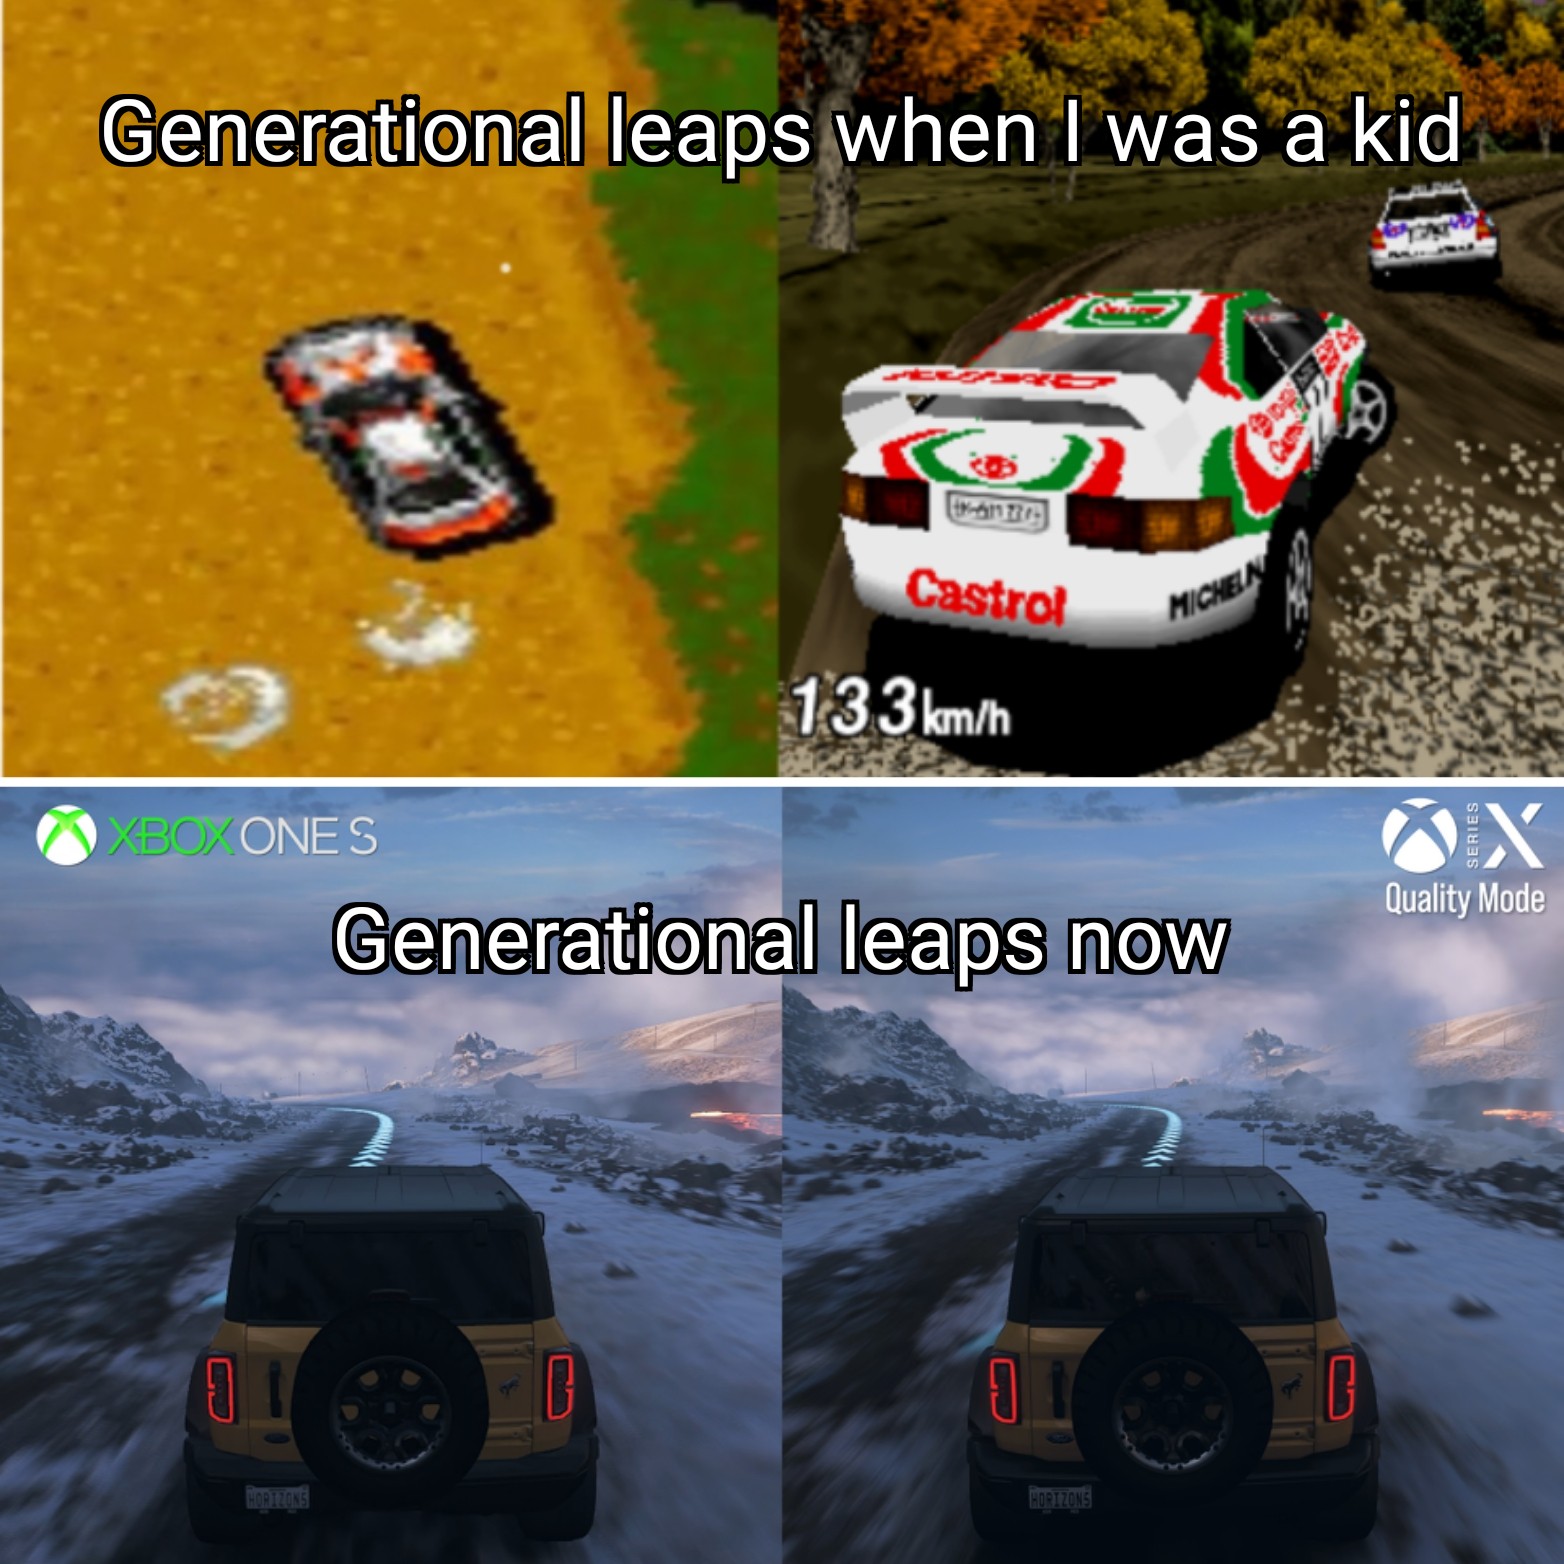 hilarious memes - generational leap when i was a kid - Generational leaps when I was a kid 17 Castrol Michen 133 kmh Xbox Ones Ox Quality Mode Generational leaps now a i Horitions Horizon